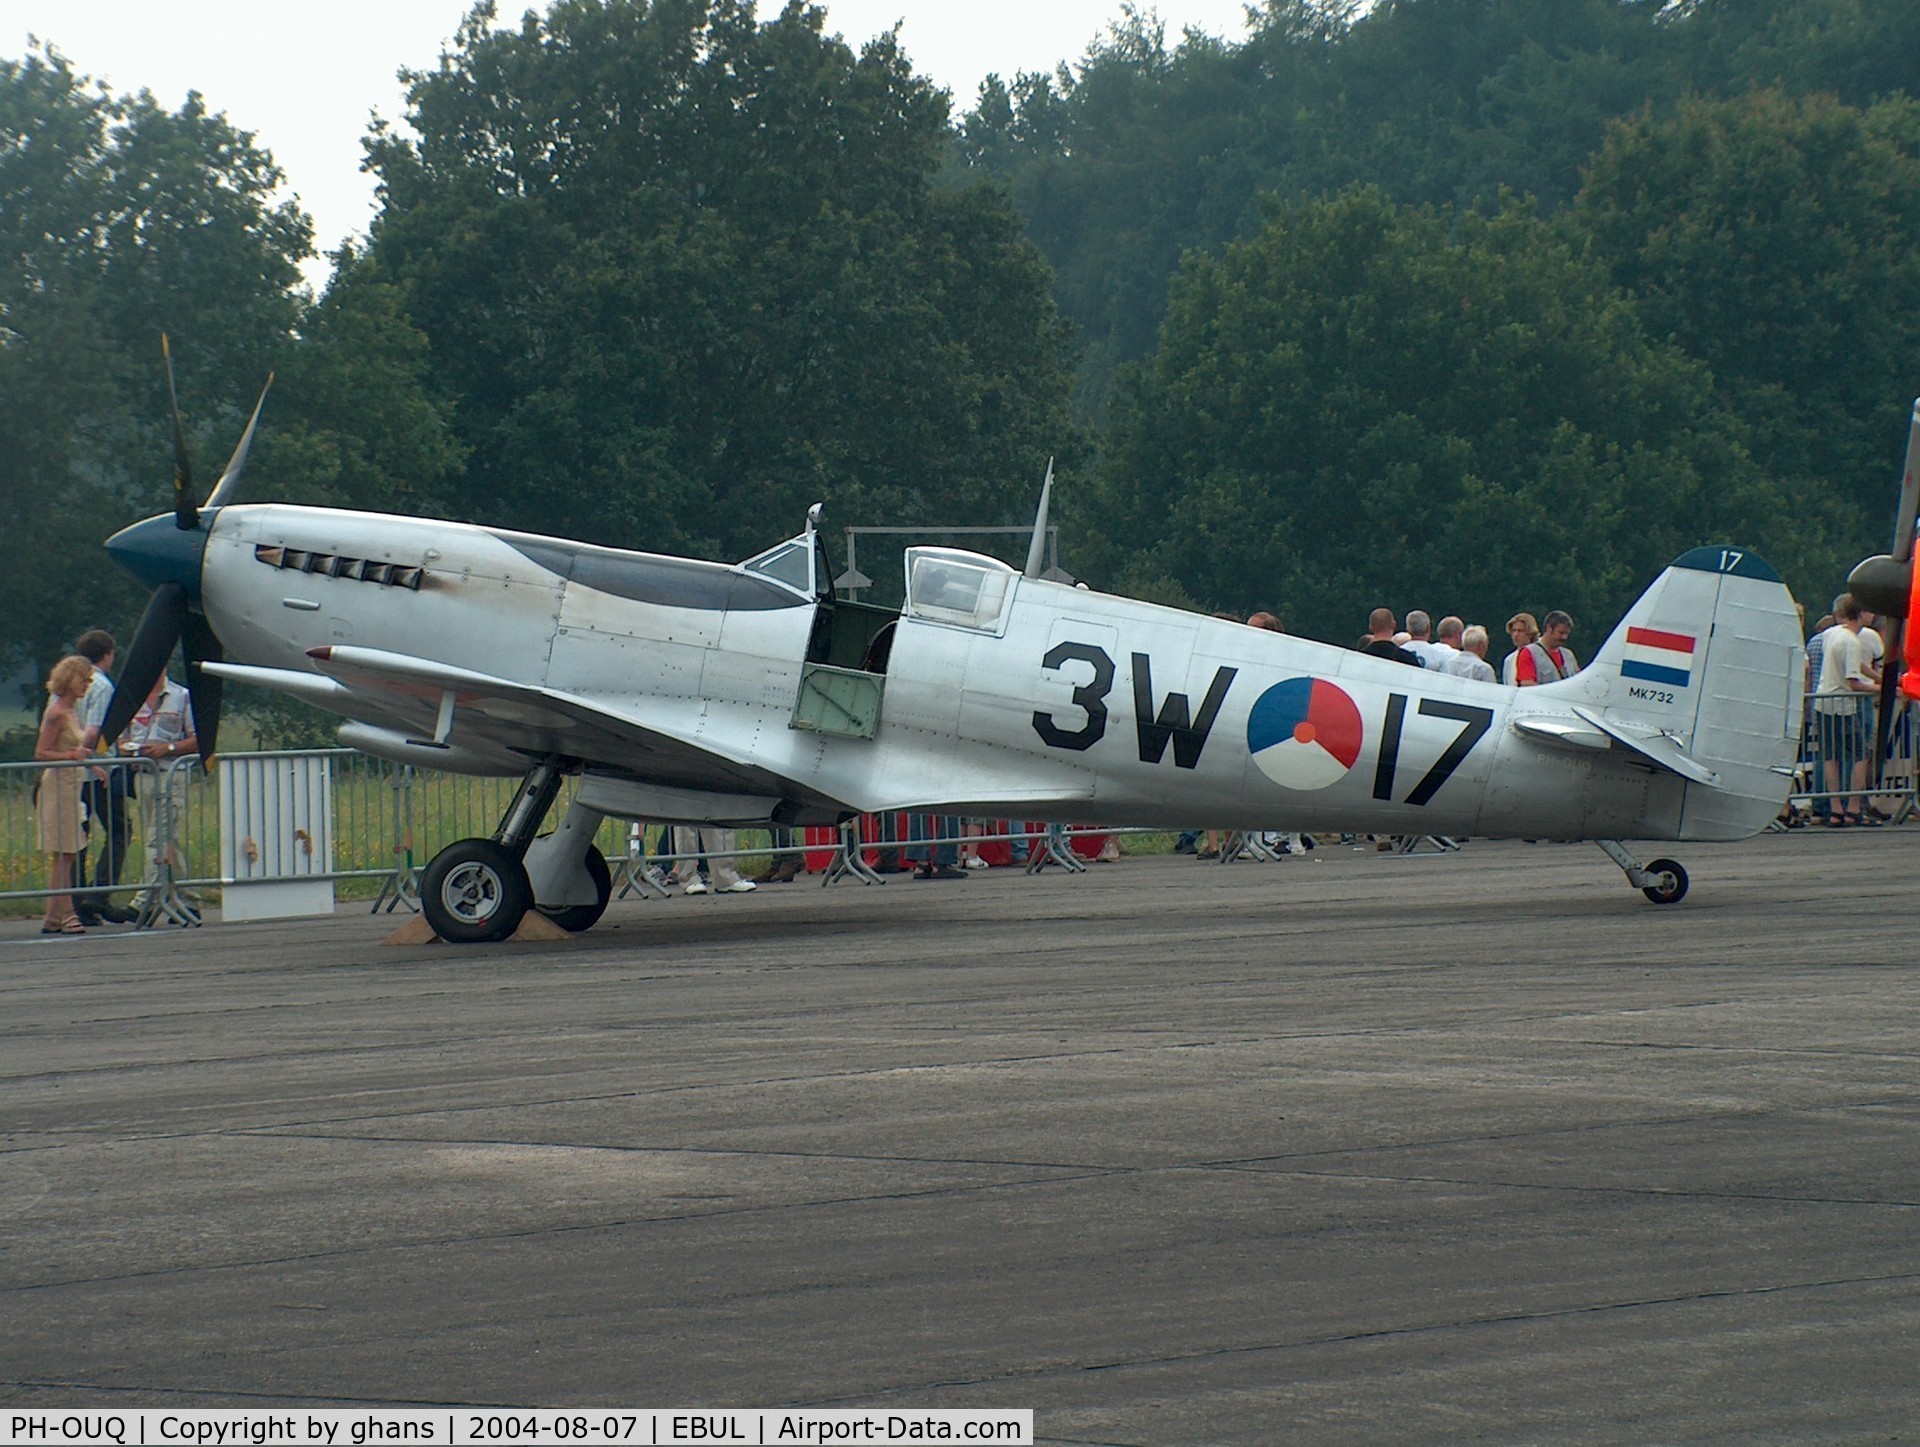 PH-OUQ, 1943 Supermarine 361 Spitfire LF.IXc C/N CBAF.IX.1732, One of the few flying Spitfires left in Europe